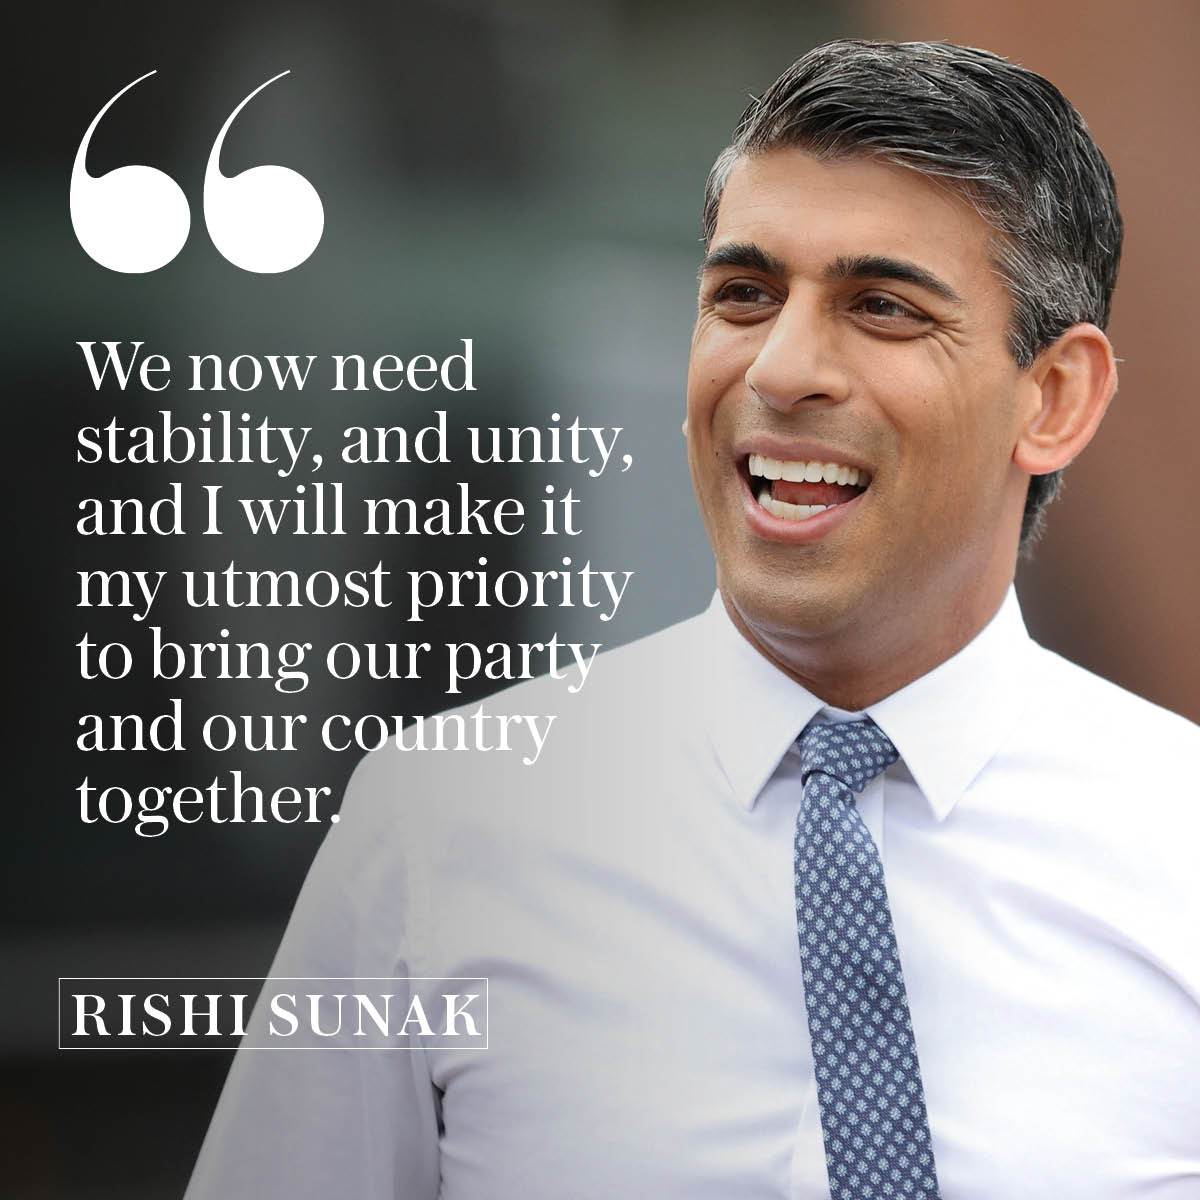 Rishi Sunak has promised to bring 'stability' and 'unity' to the United Kingdom after he was crowned as the new Tory leader and the next Prime Minister

More ⤵️
telegraph.co.uk/politics/2022/…